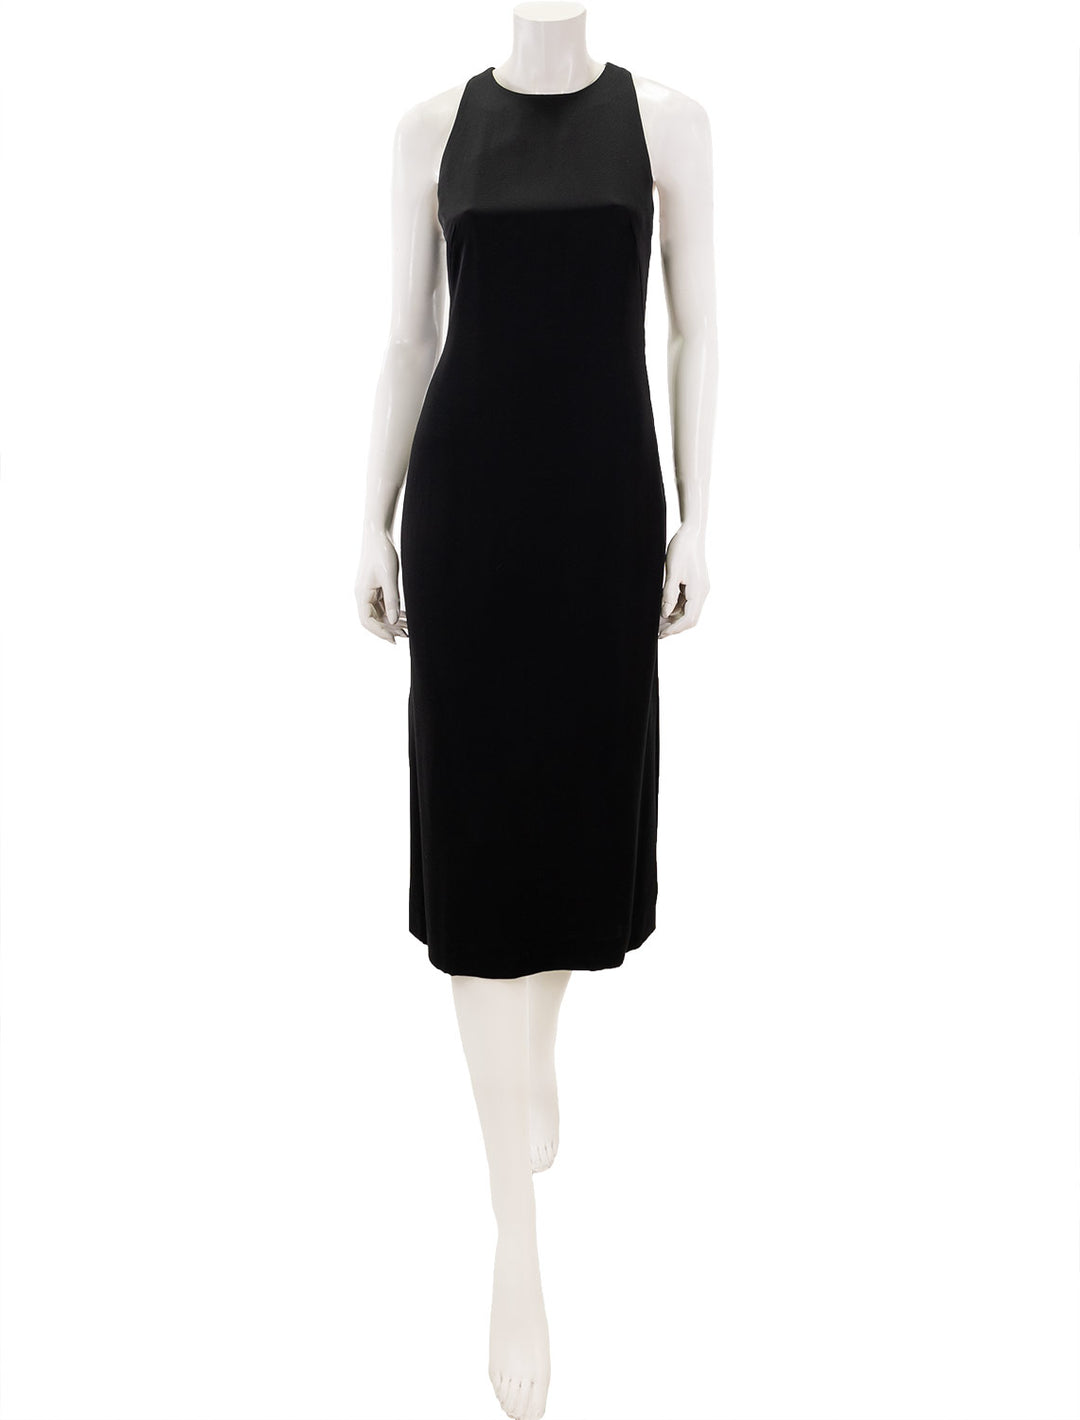 Front view of Theory's cross back midi dress in black.